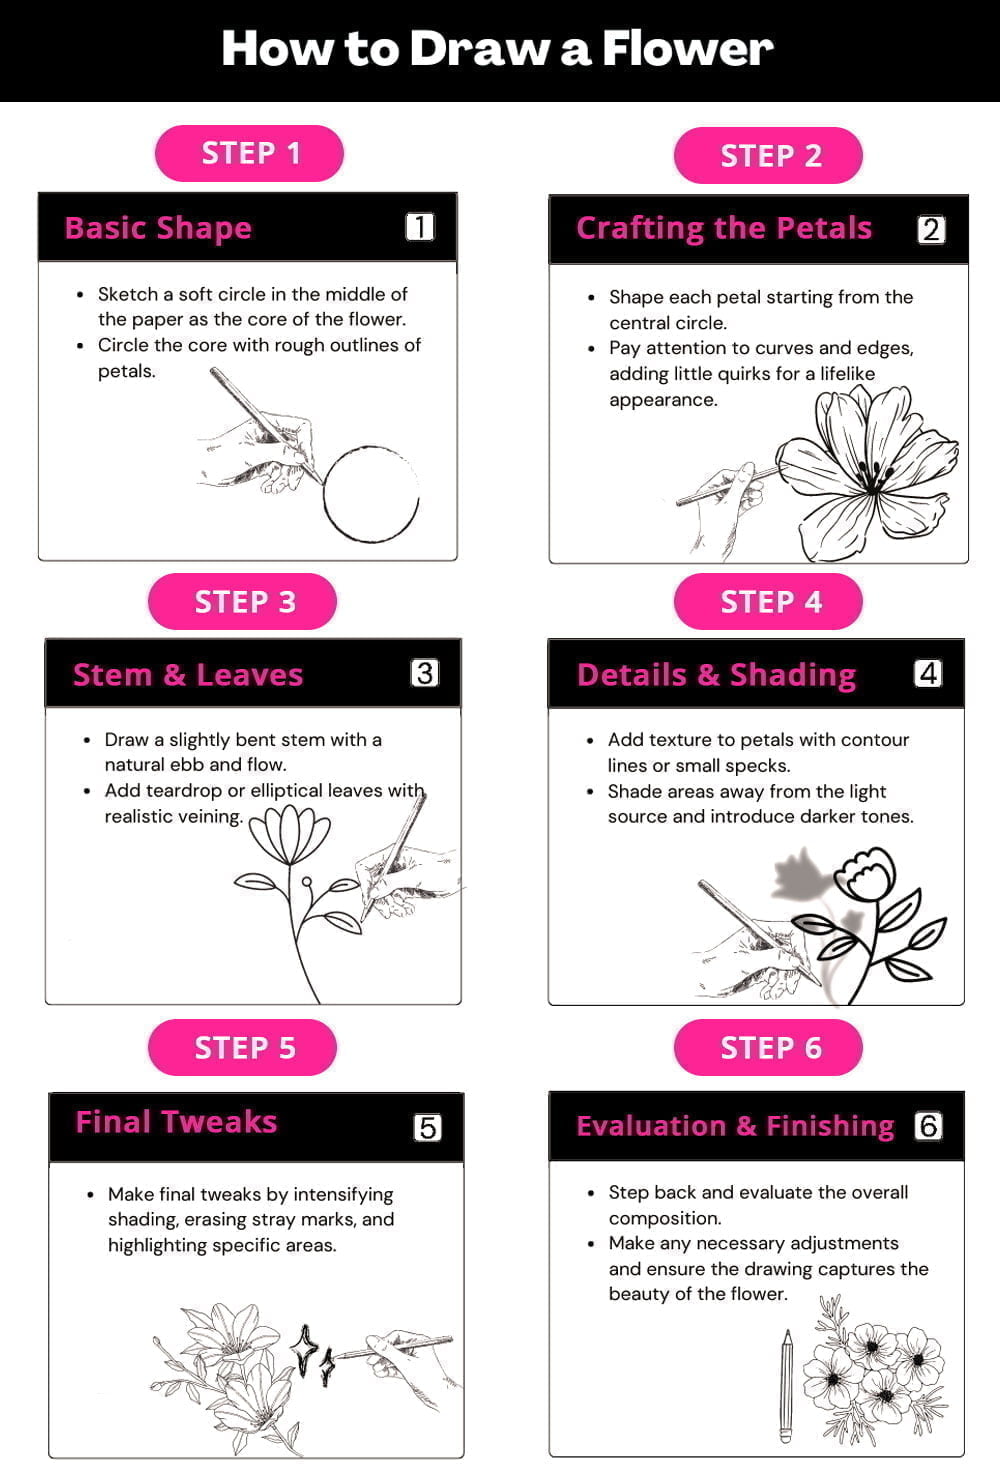 Step-by-Step Guide: How to Draw a Flower - All 5 Steps in a Process Flow Chart